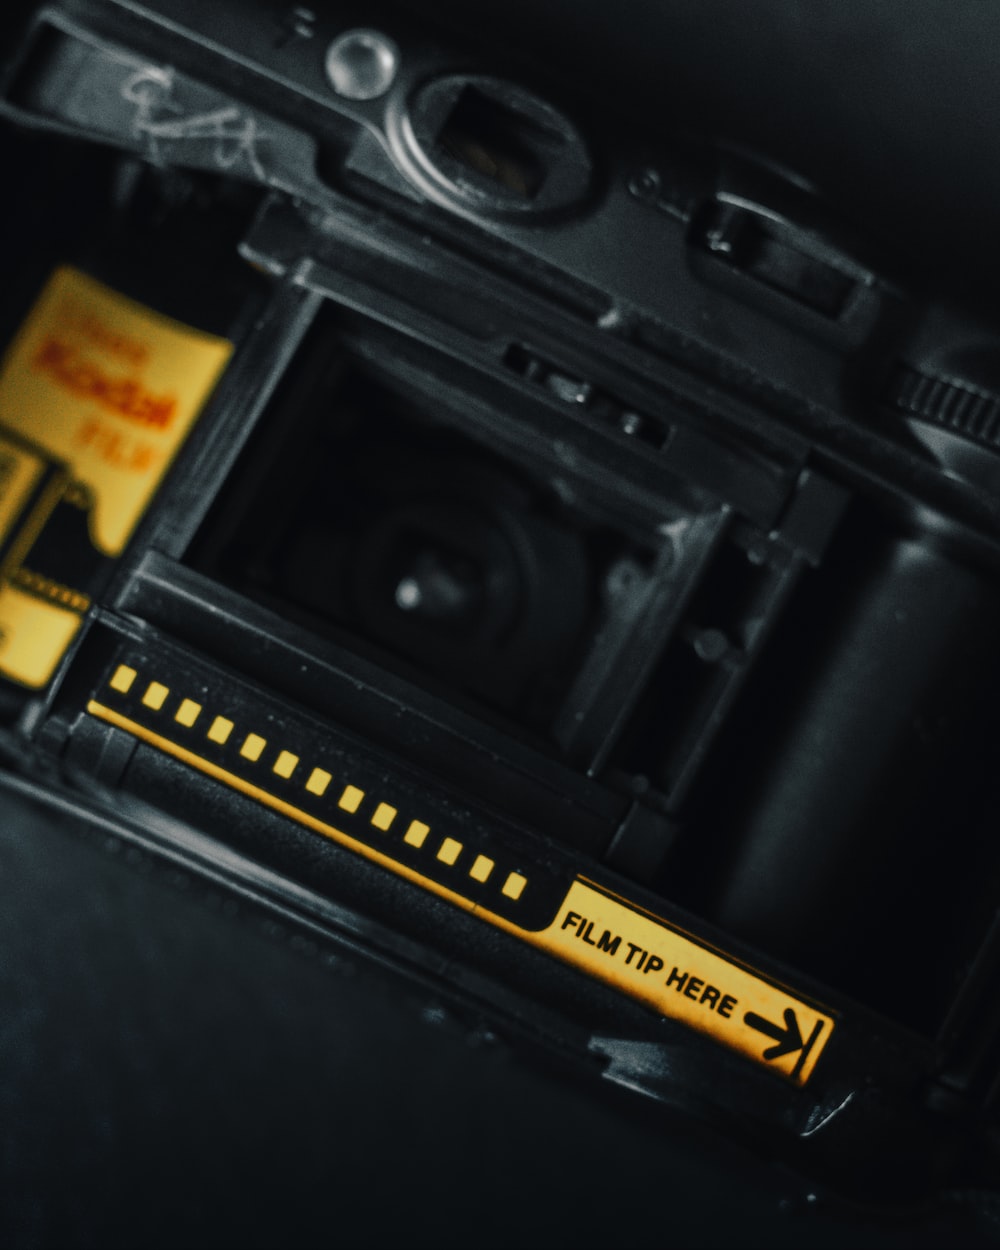 a close up of a camera with a yellow sticker on it